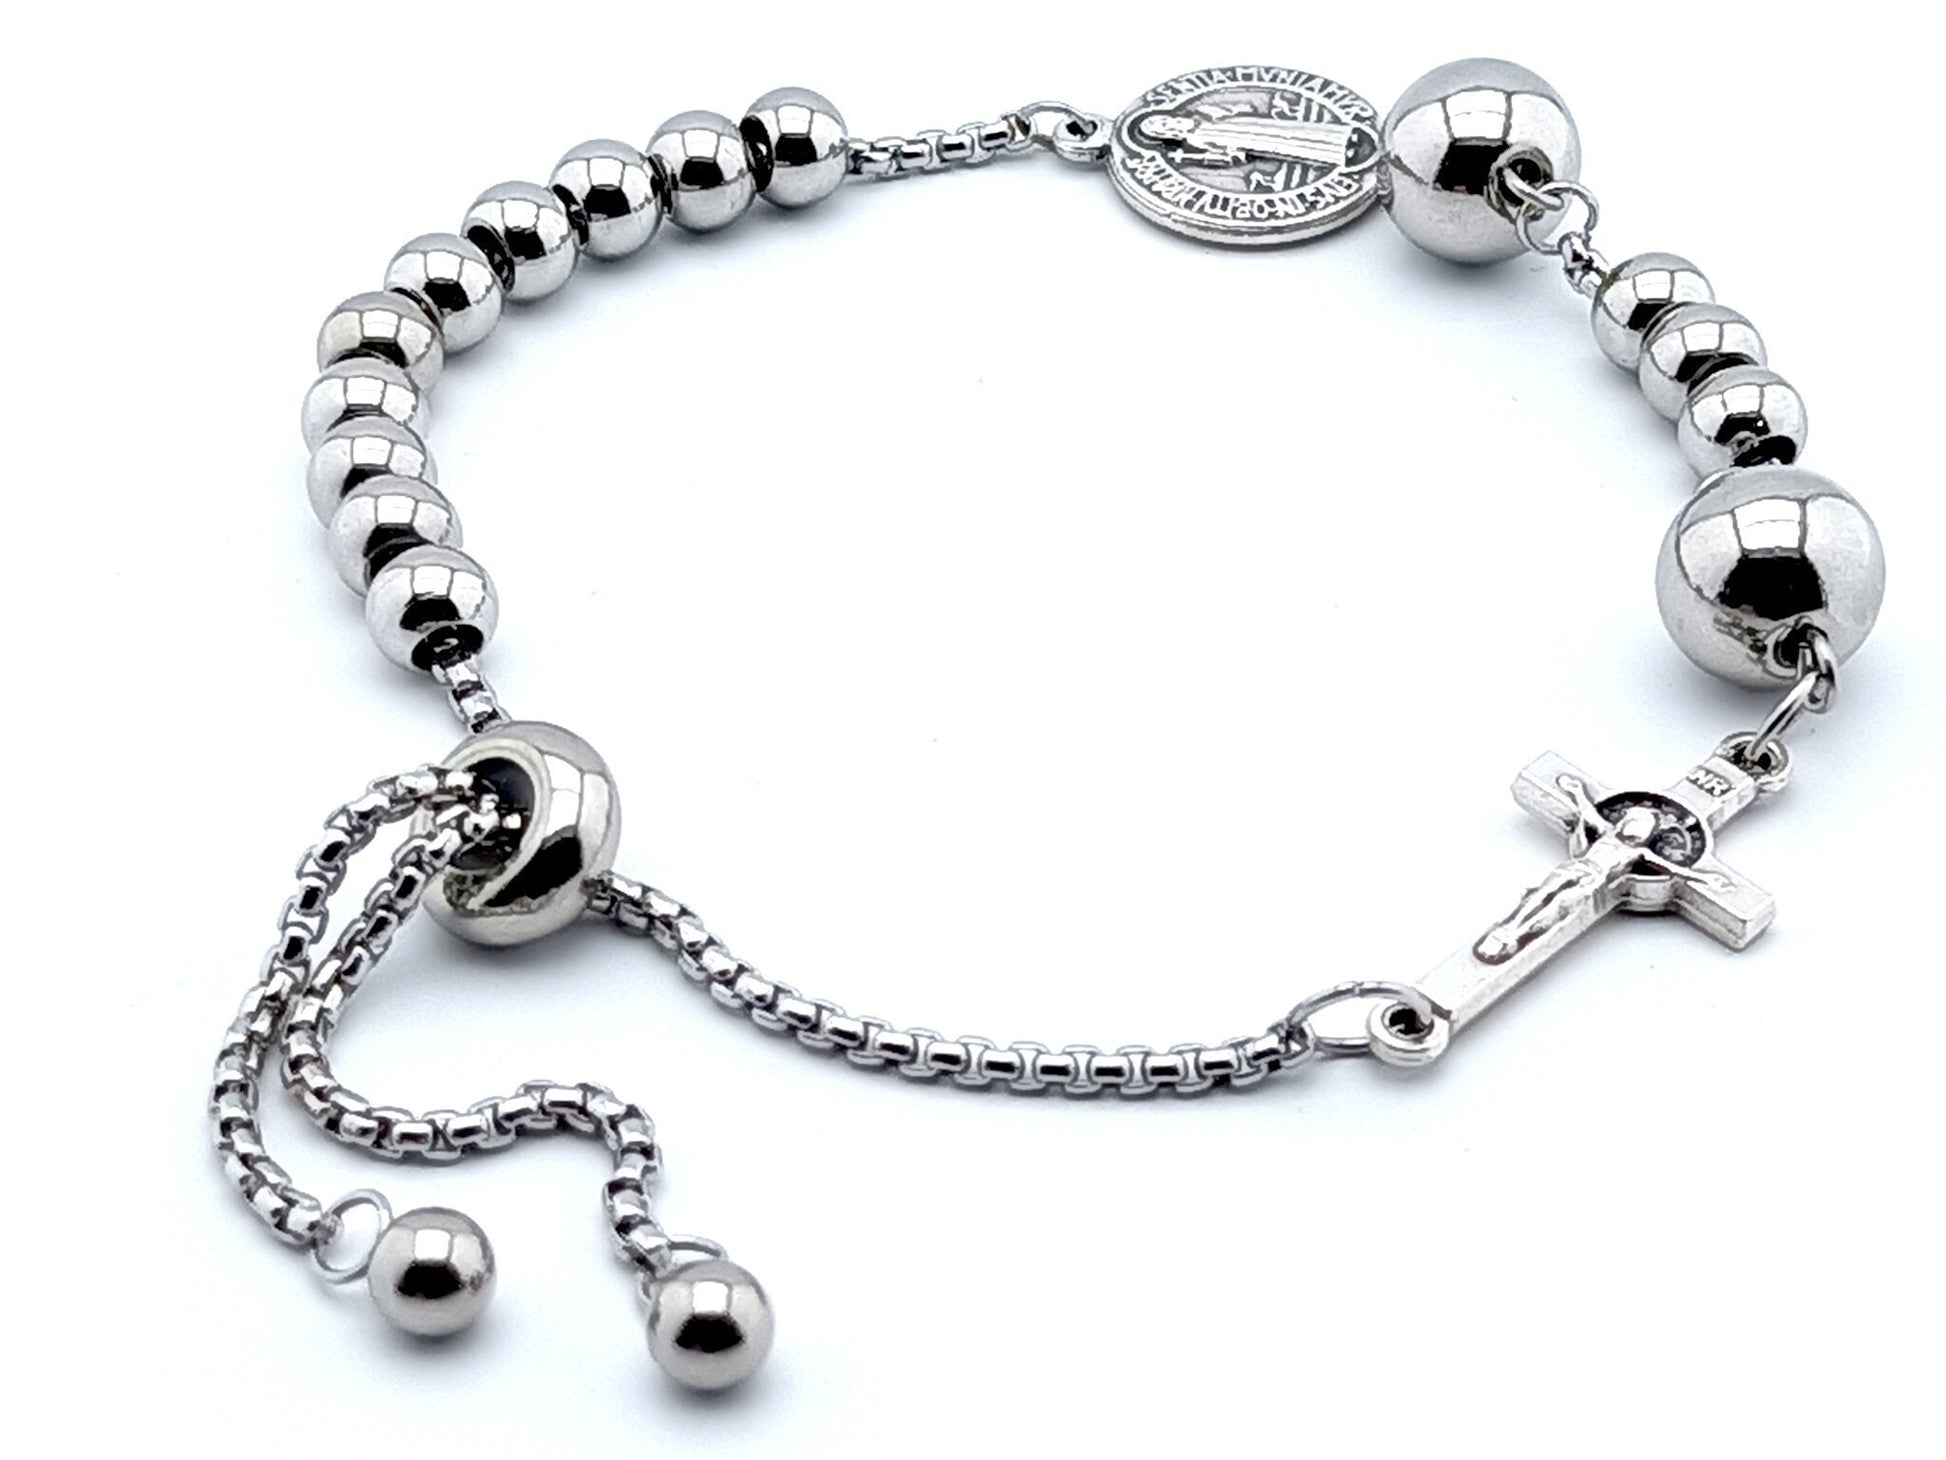 Saint Benedict unique rosary beads single decade rosary bracelet with stainless steel beads, silver plated linking crucifix and medal.